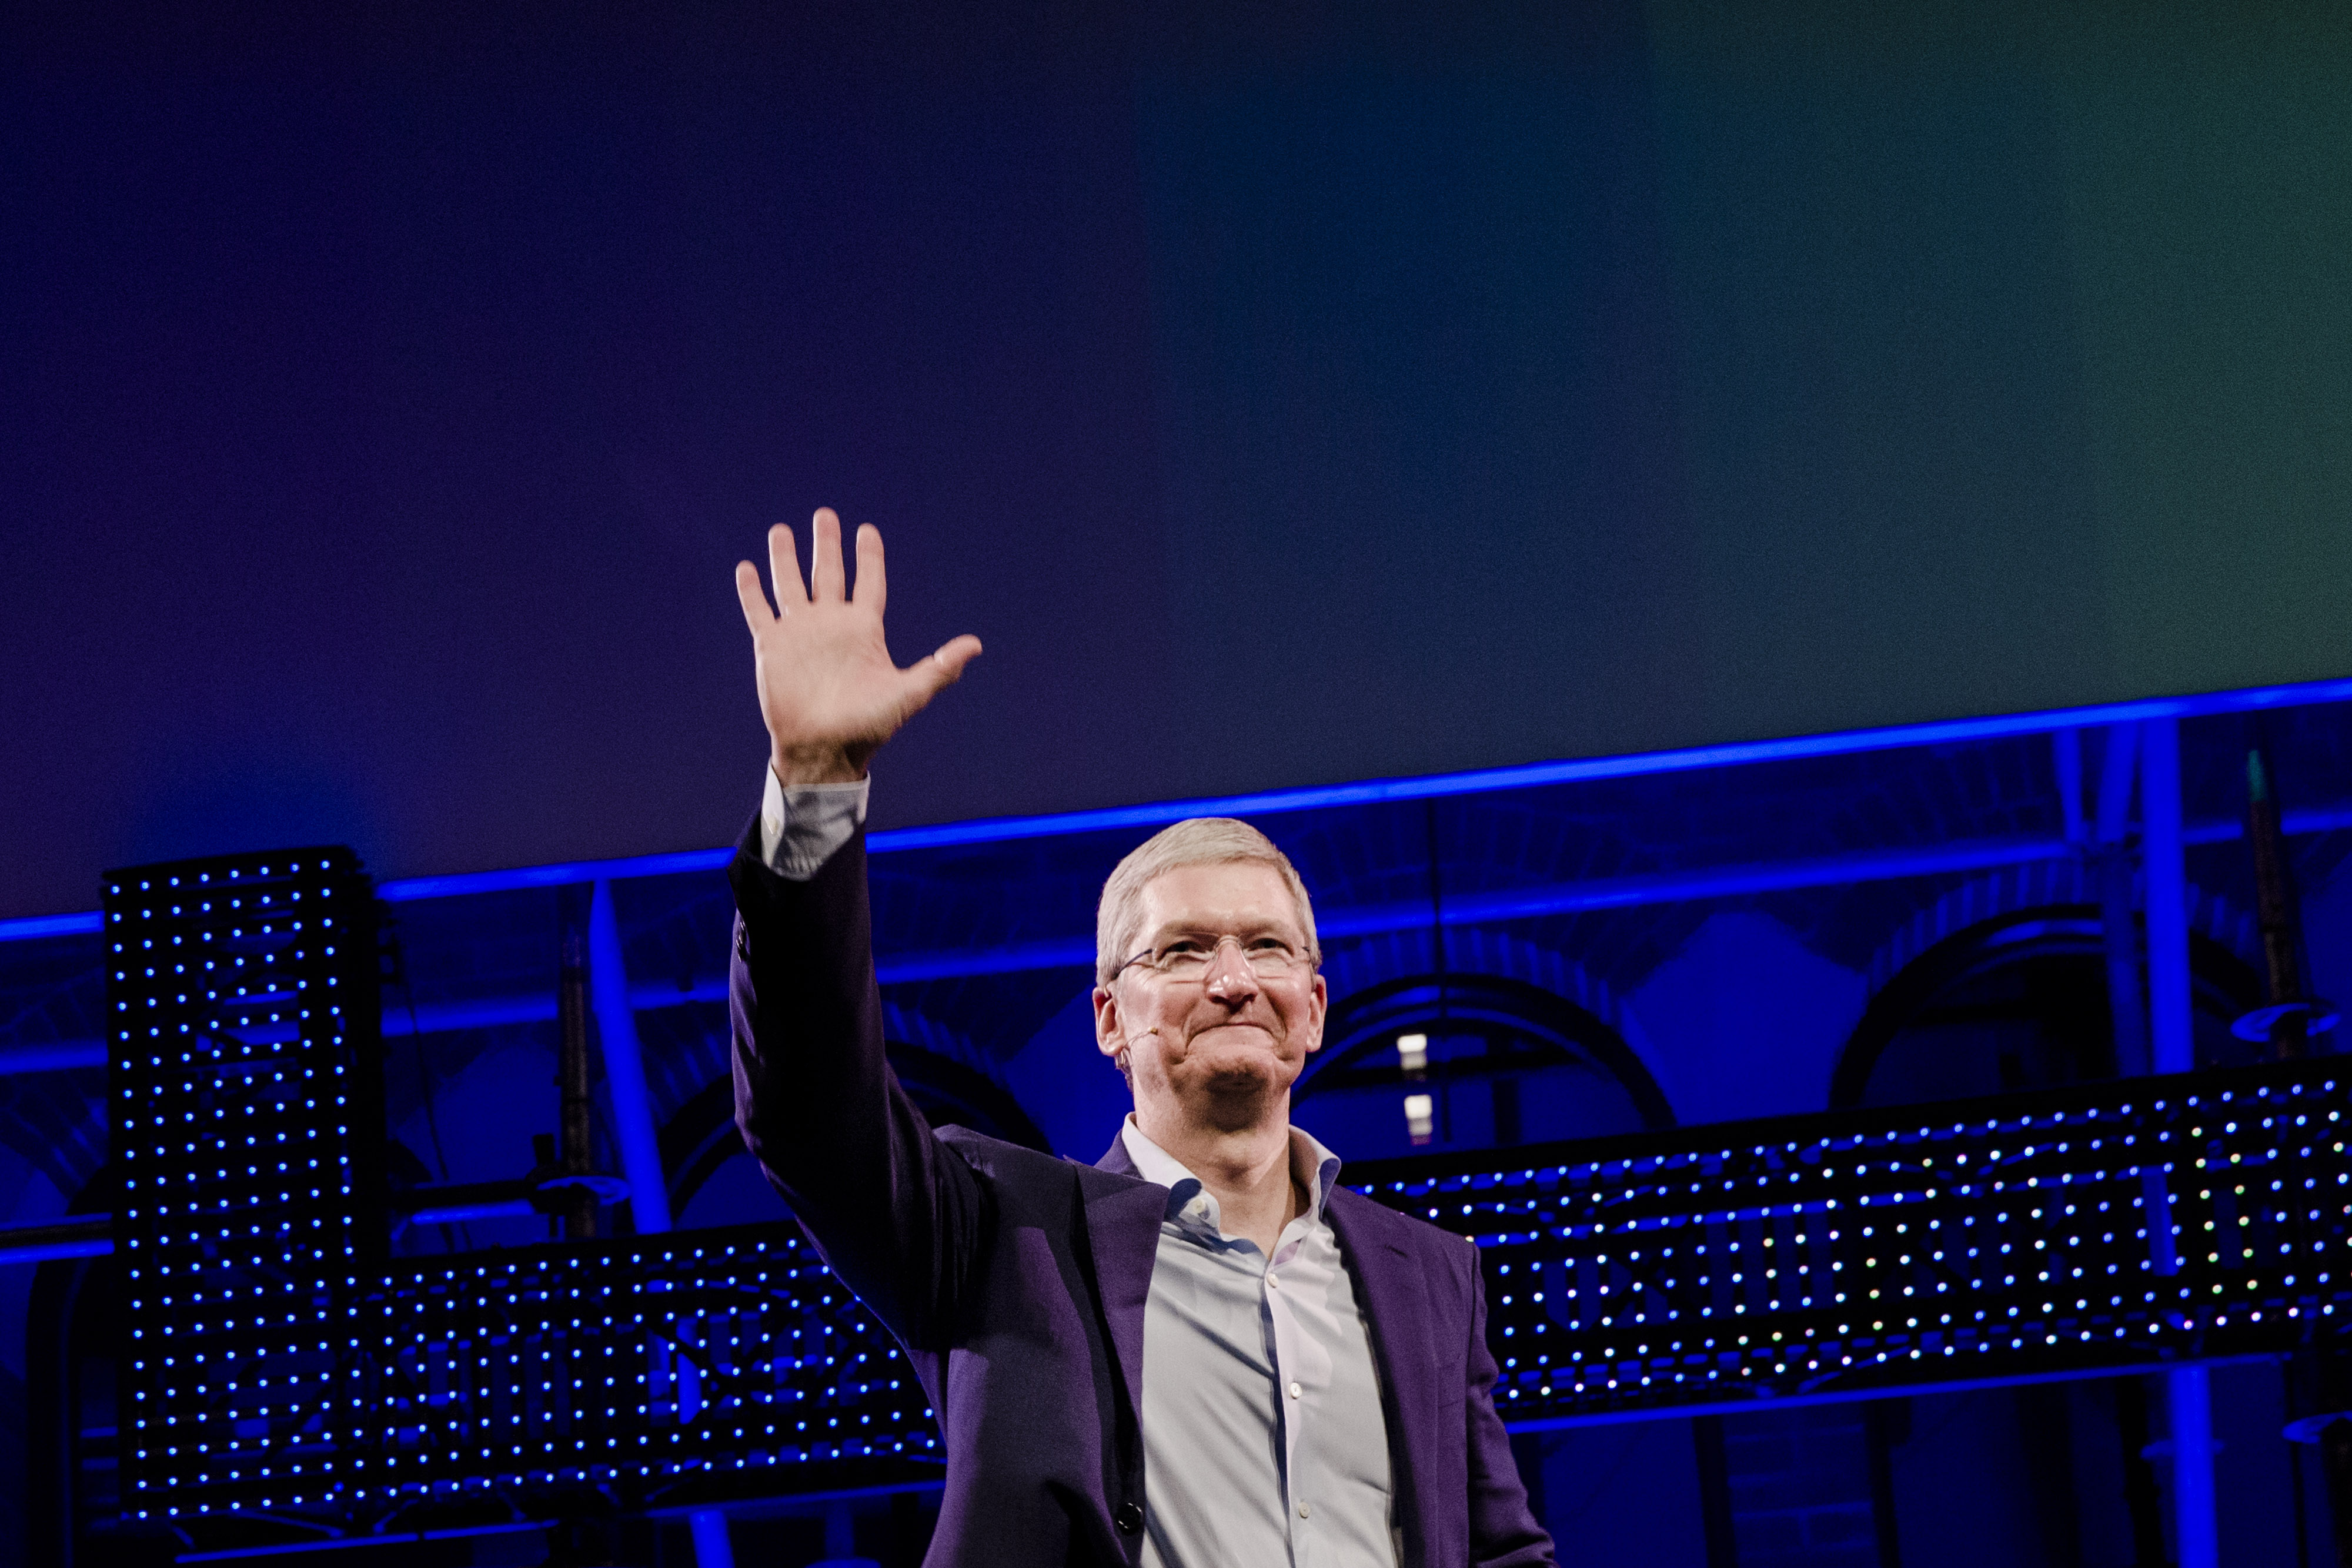 Apple Inc. Chief Executive Officer Tim Cook And Key Speakers At Startup Fest Europe